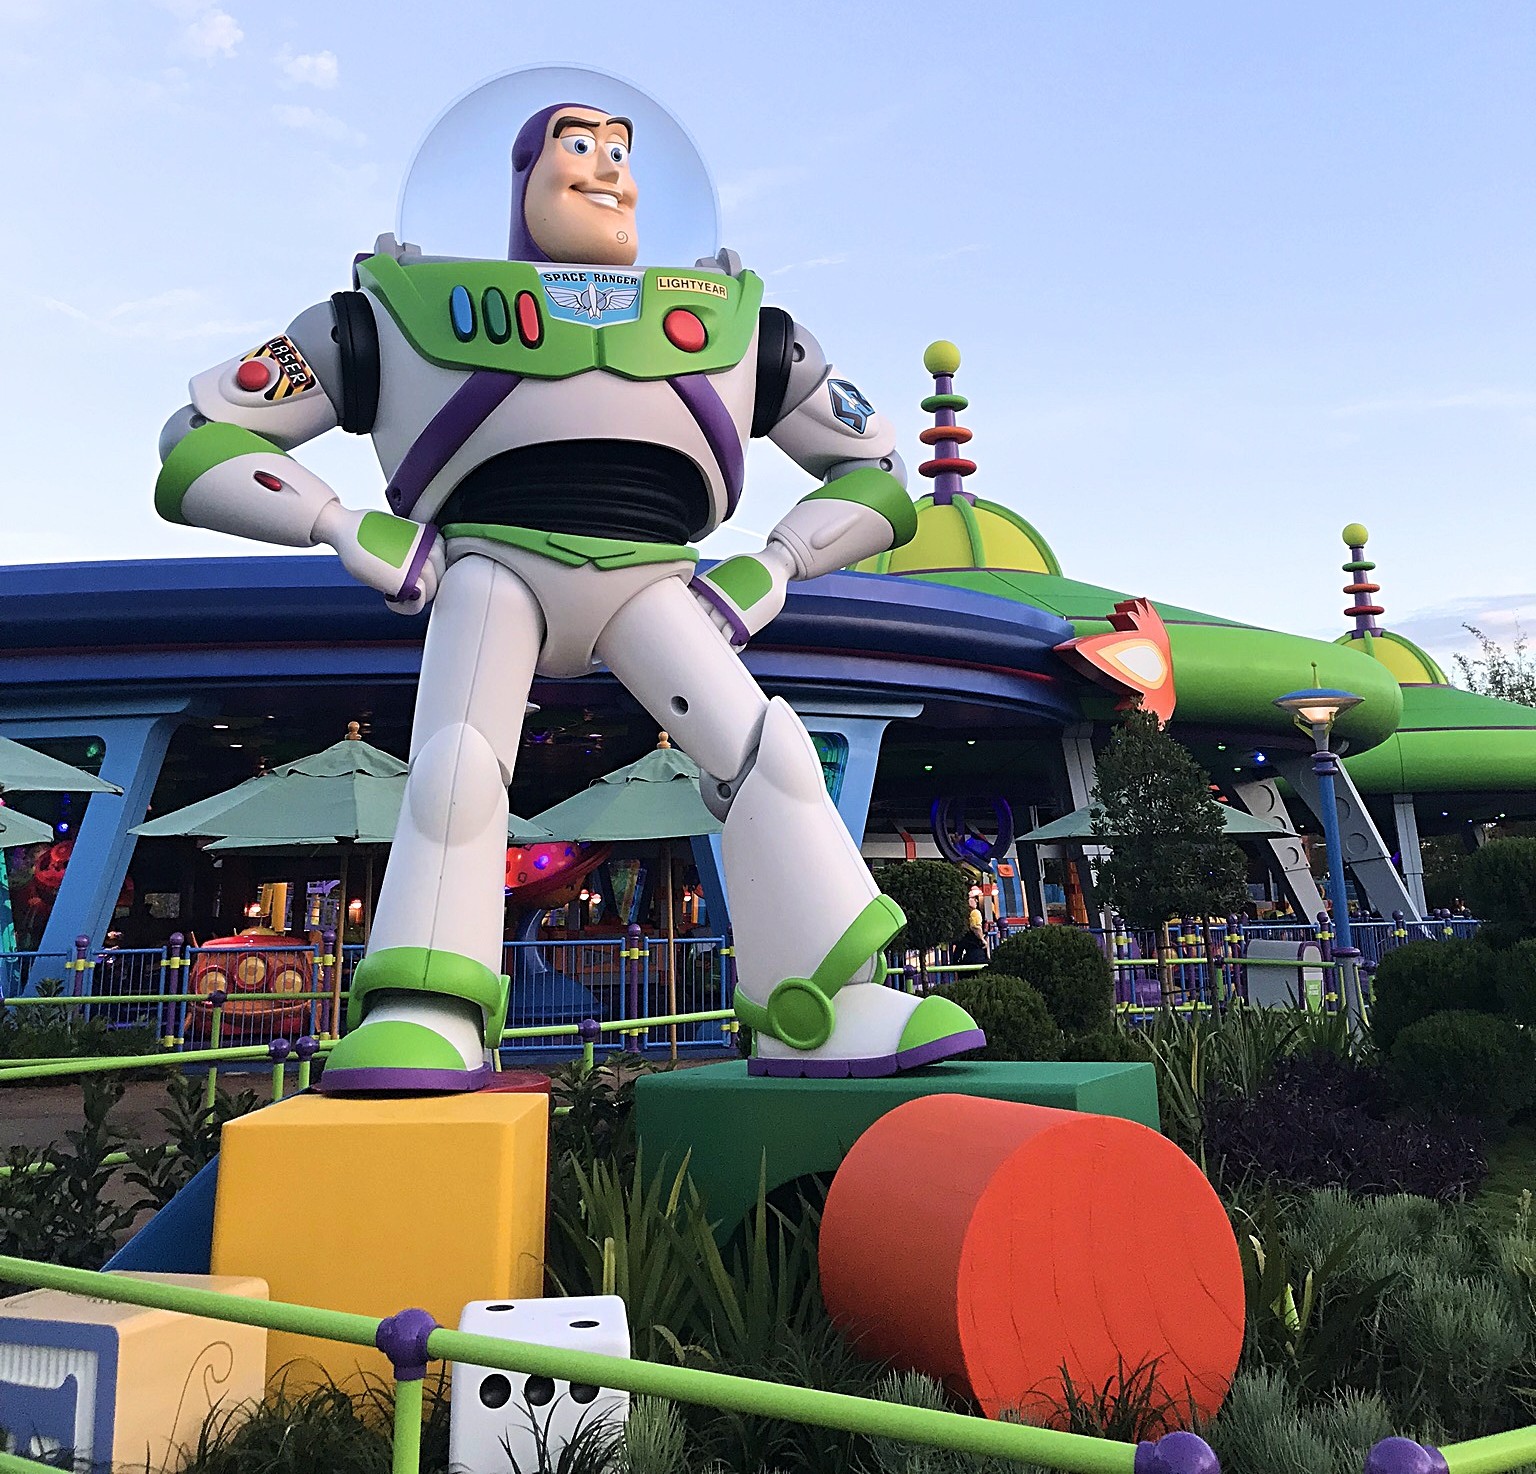 buzz light year statue in toy story land